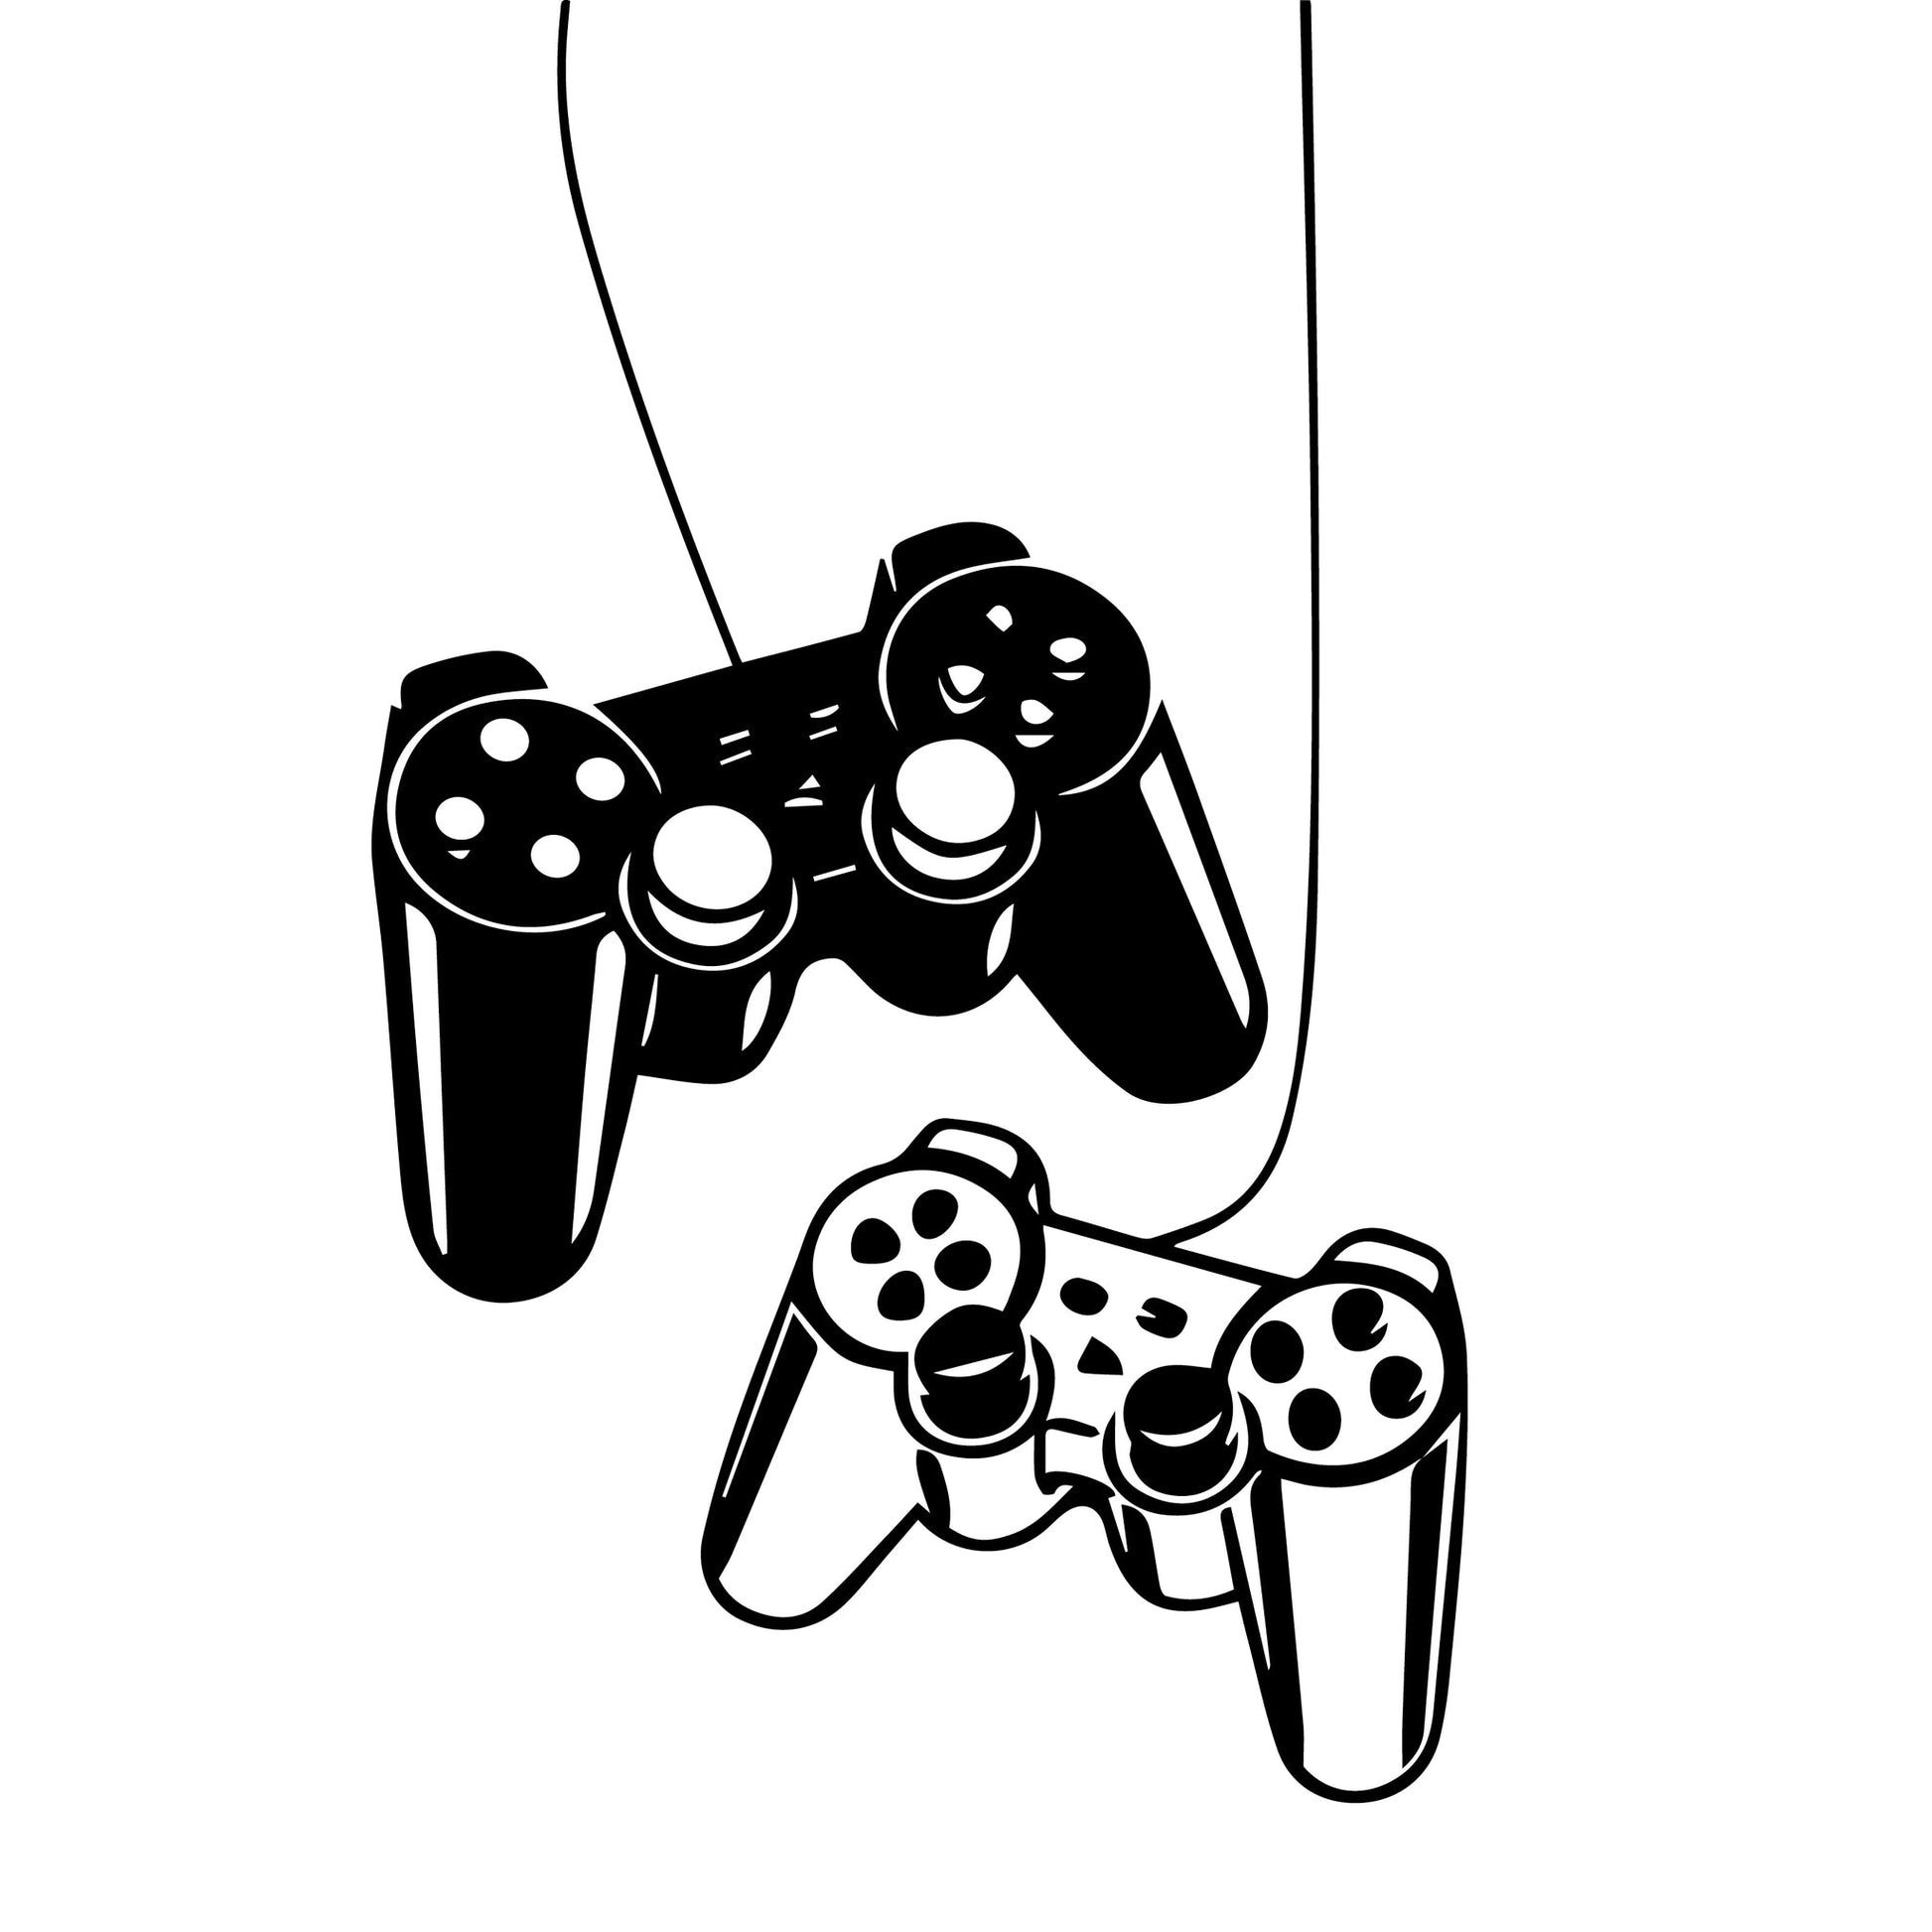 Gaming Controller - Wall Decal Sticker